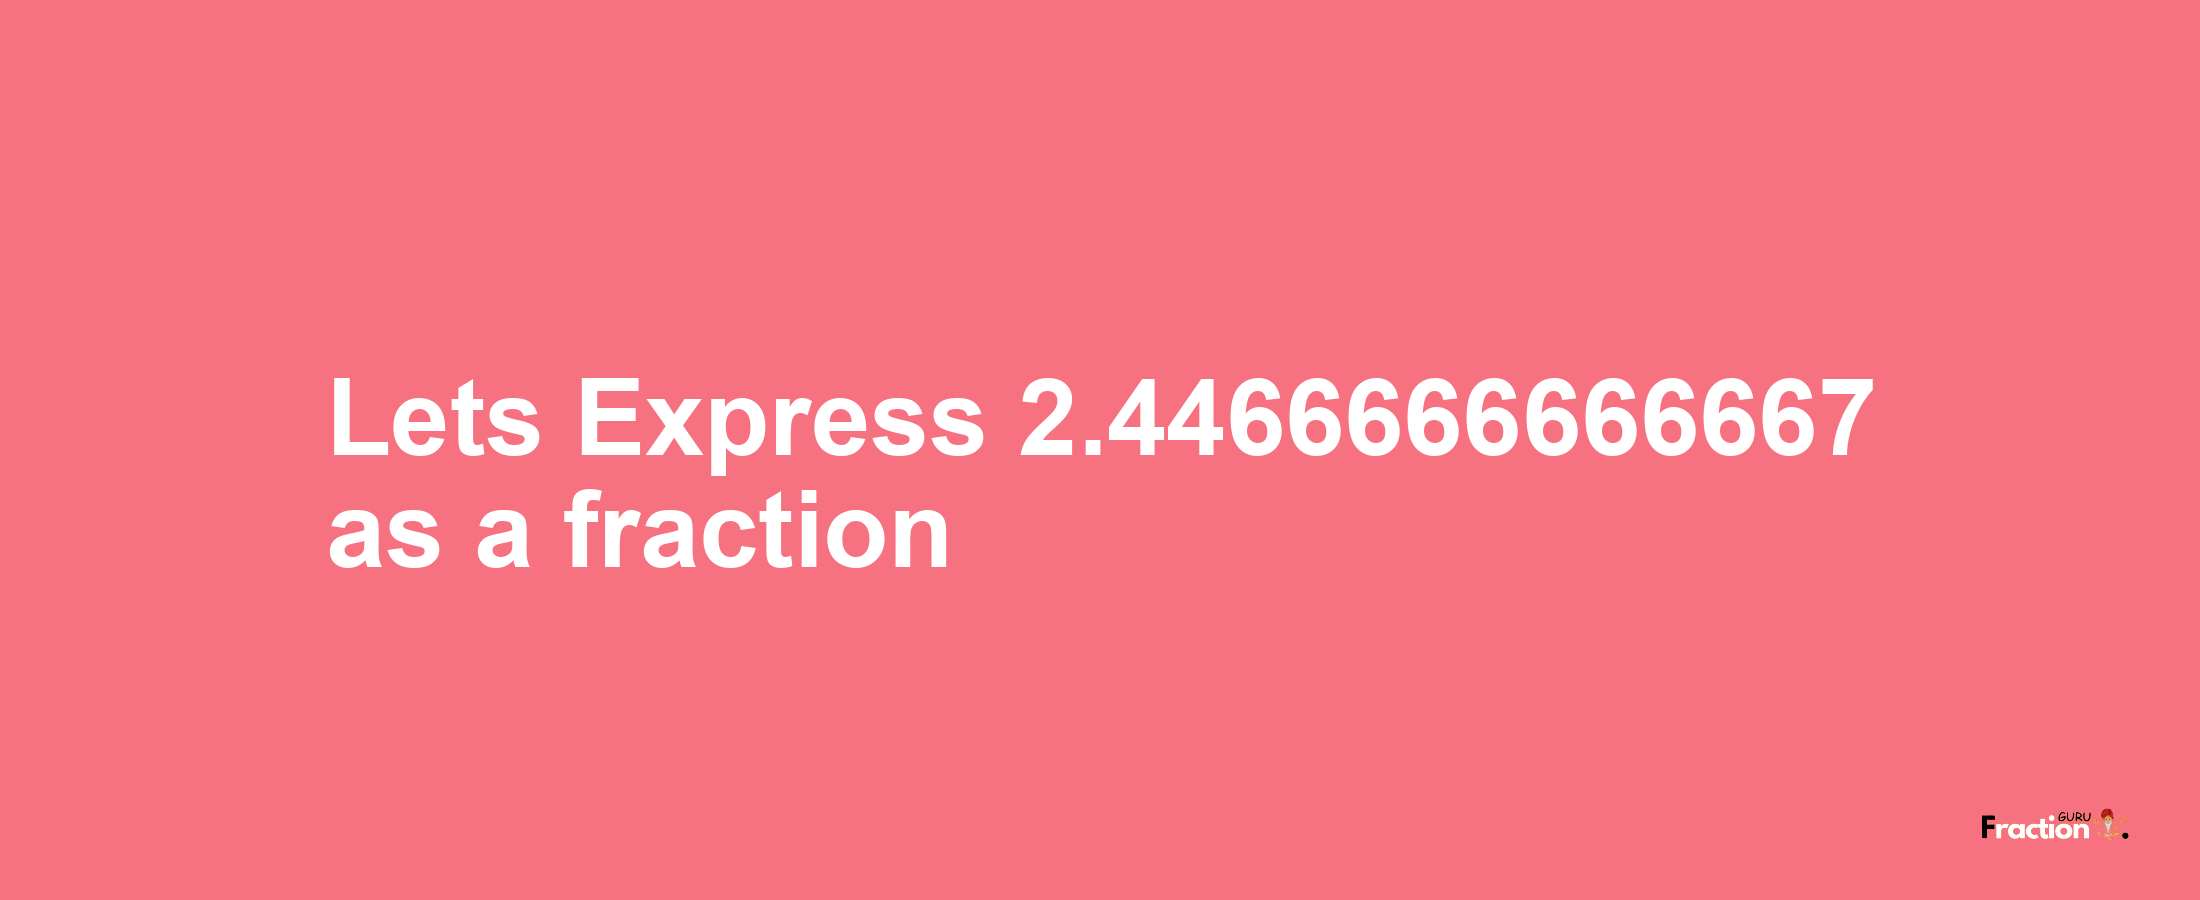 Lets Express 2.4466666666667 as afraction